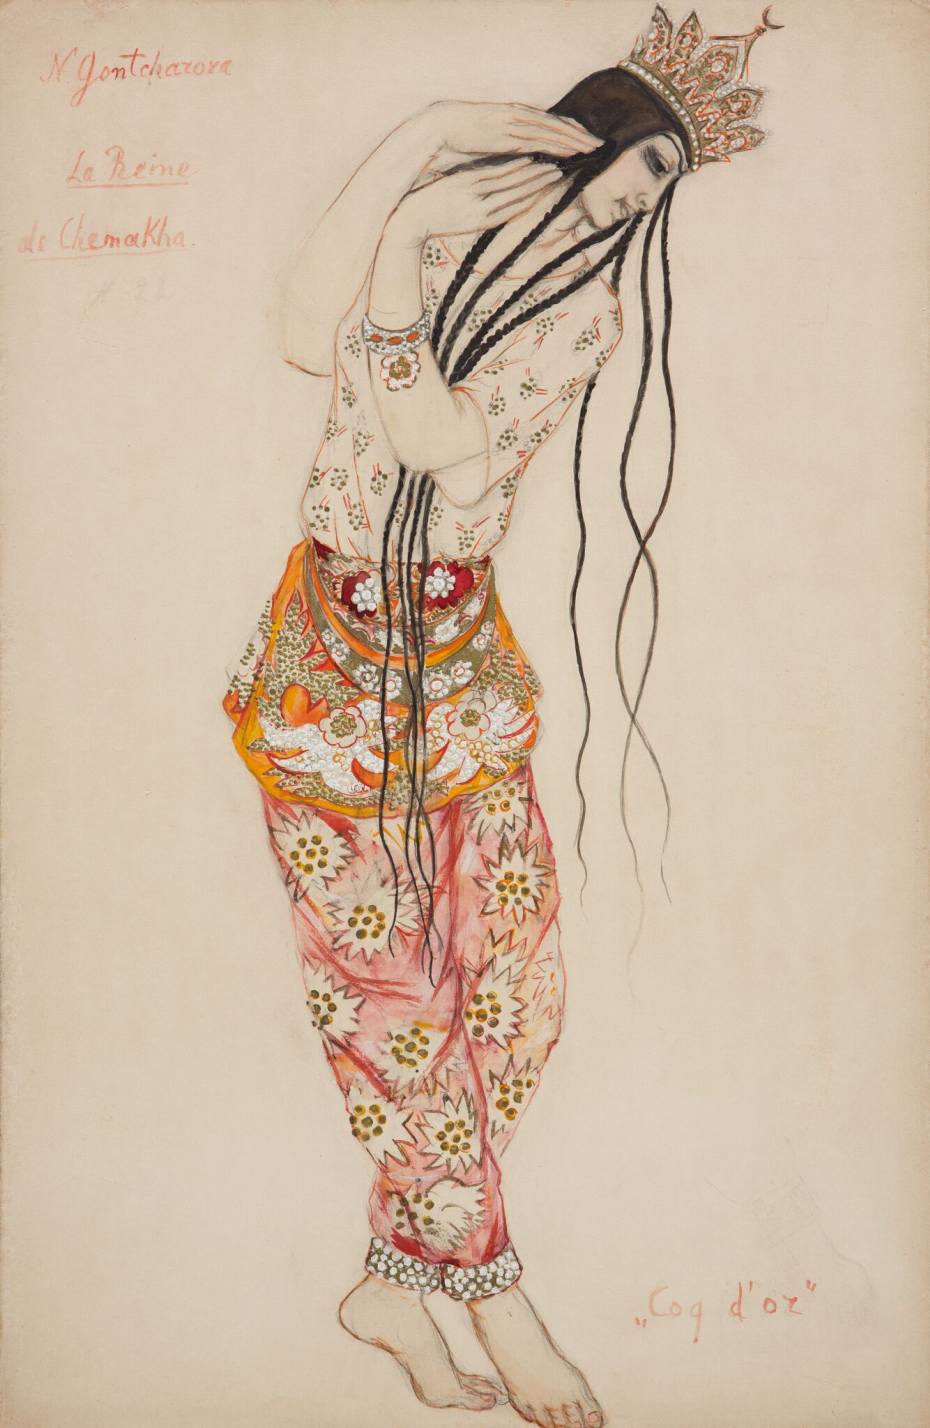 6. N.Goncharova (1881 – 1962), design for the costume of the Queen of Shamakhan in “Le Coq d’or”, chor.: M.Fokine, 1913; paper, watercolor, bronze paint, pencil, whitewash. 45,6 х 30 © Tretyakov Gallery